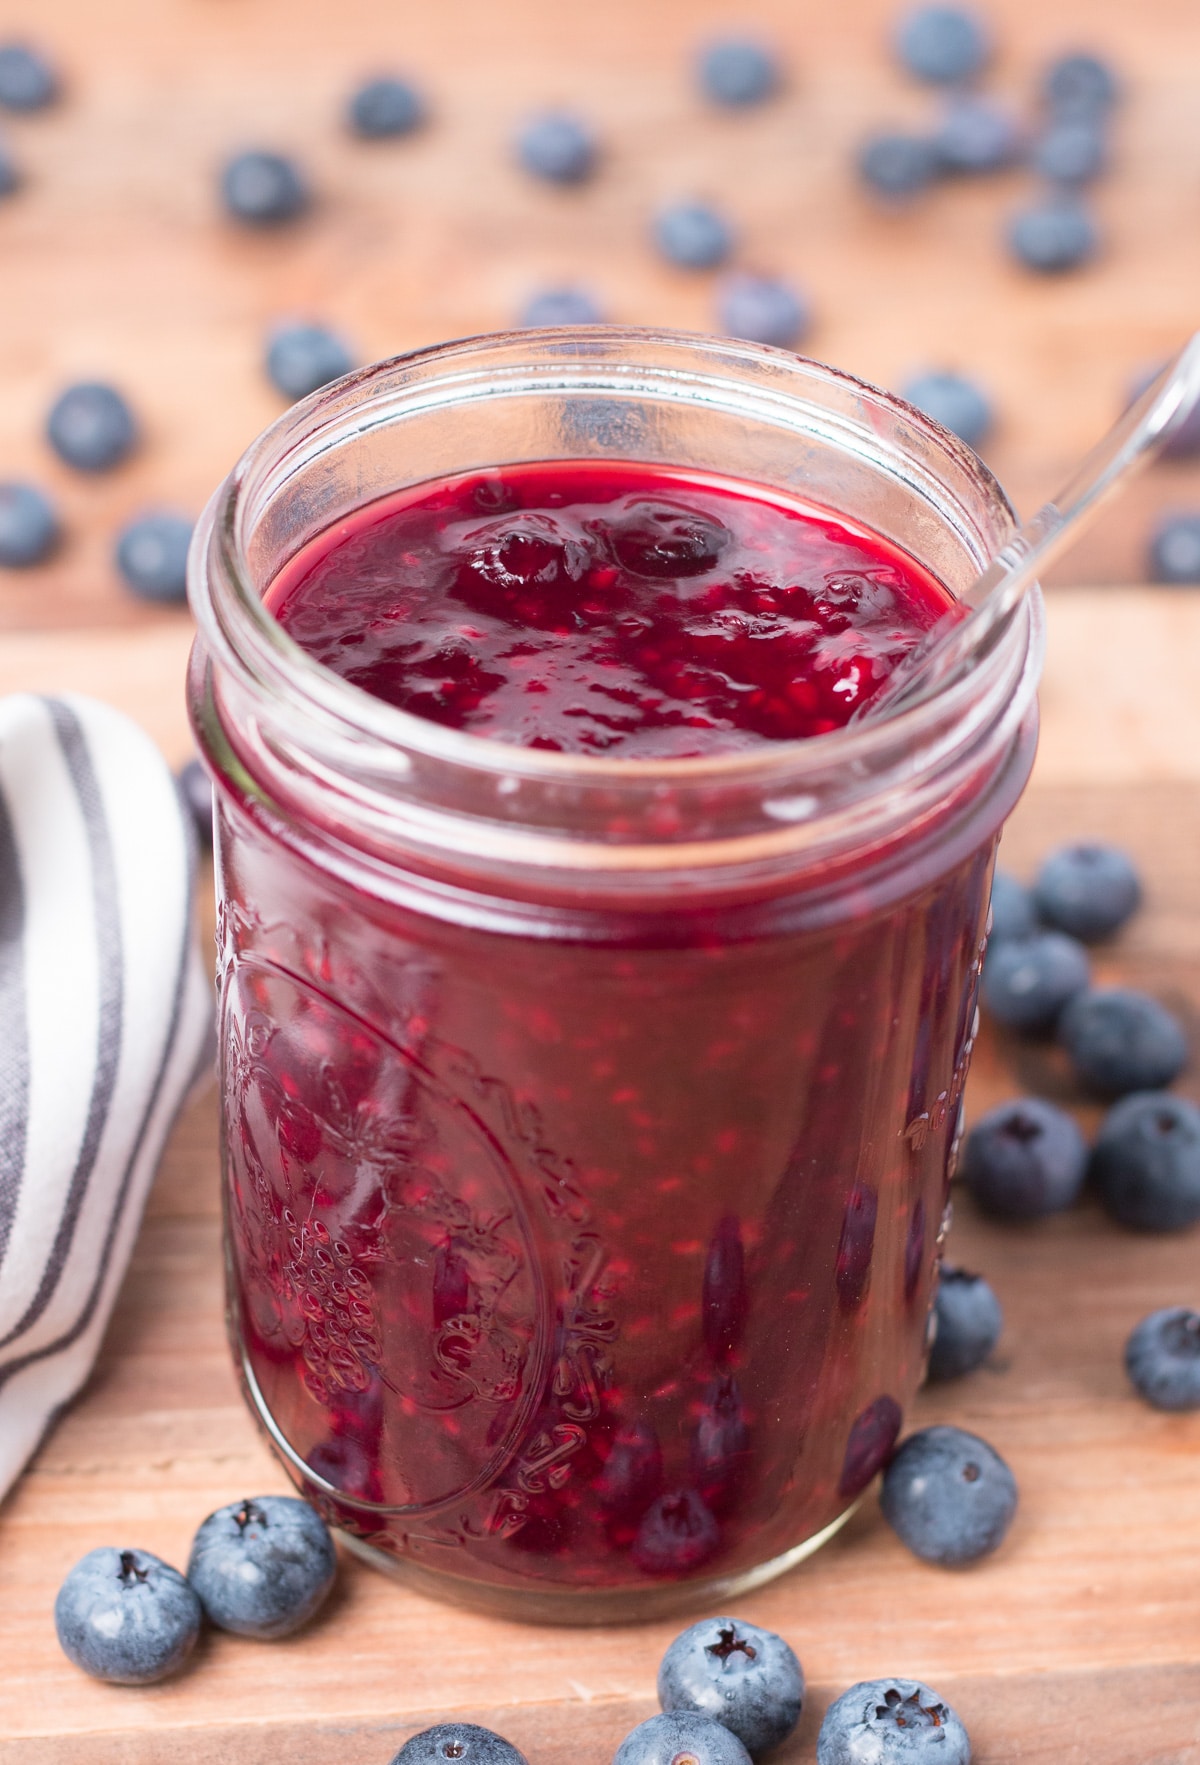 Jar of berry sauce on a wooden surface with striped napkin beside it and blueberries scattered around it